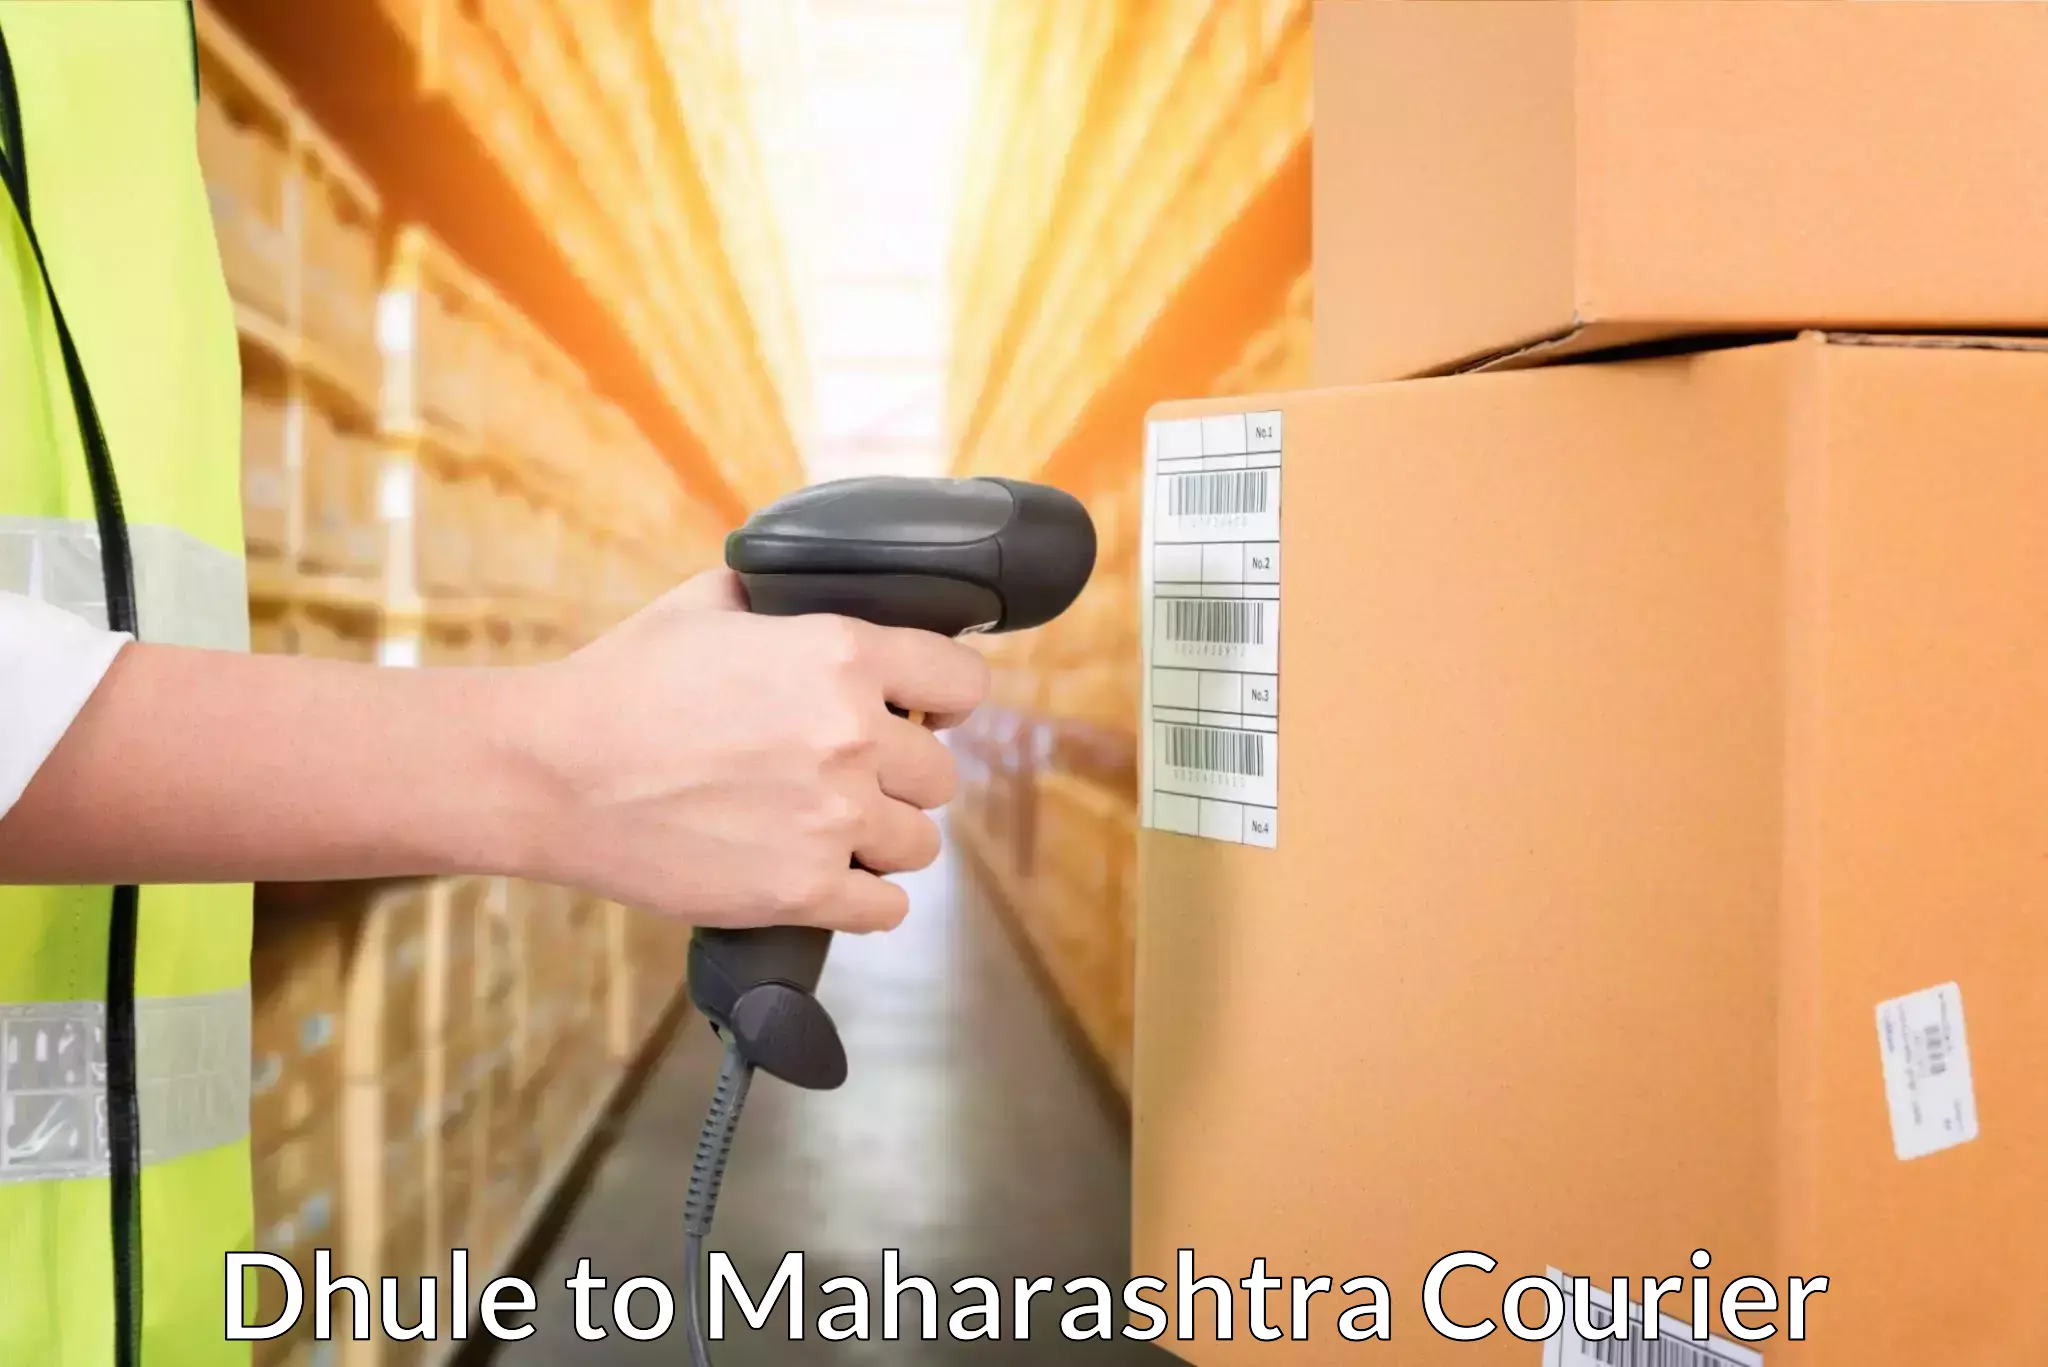 Courier service comparison in Dhule to Madgyal